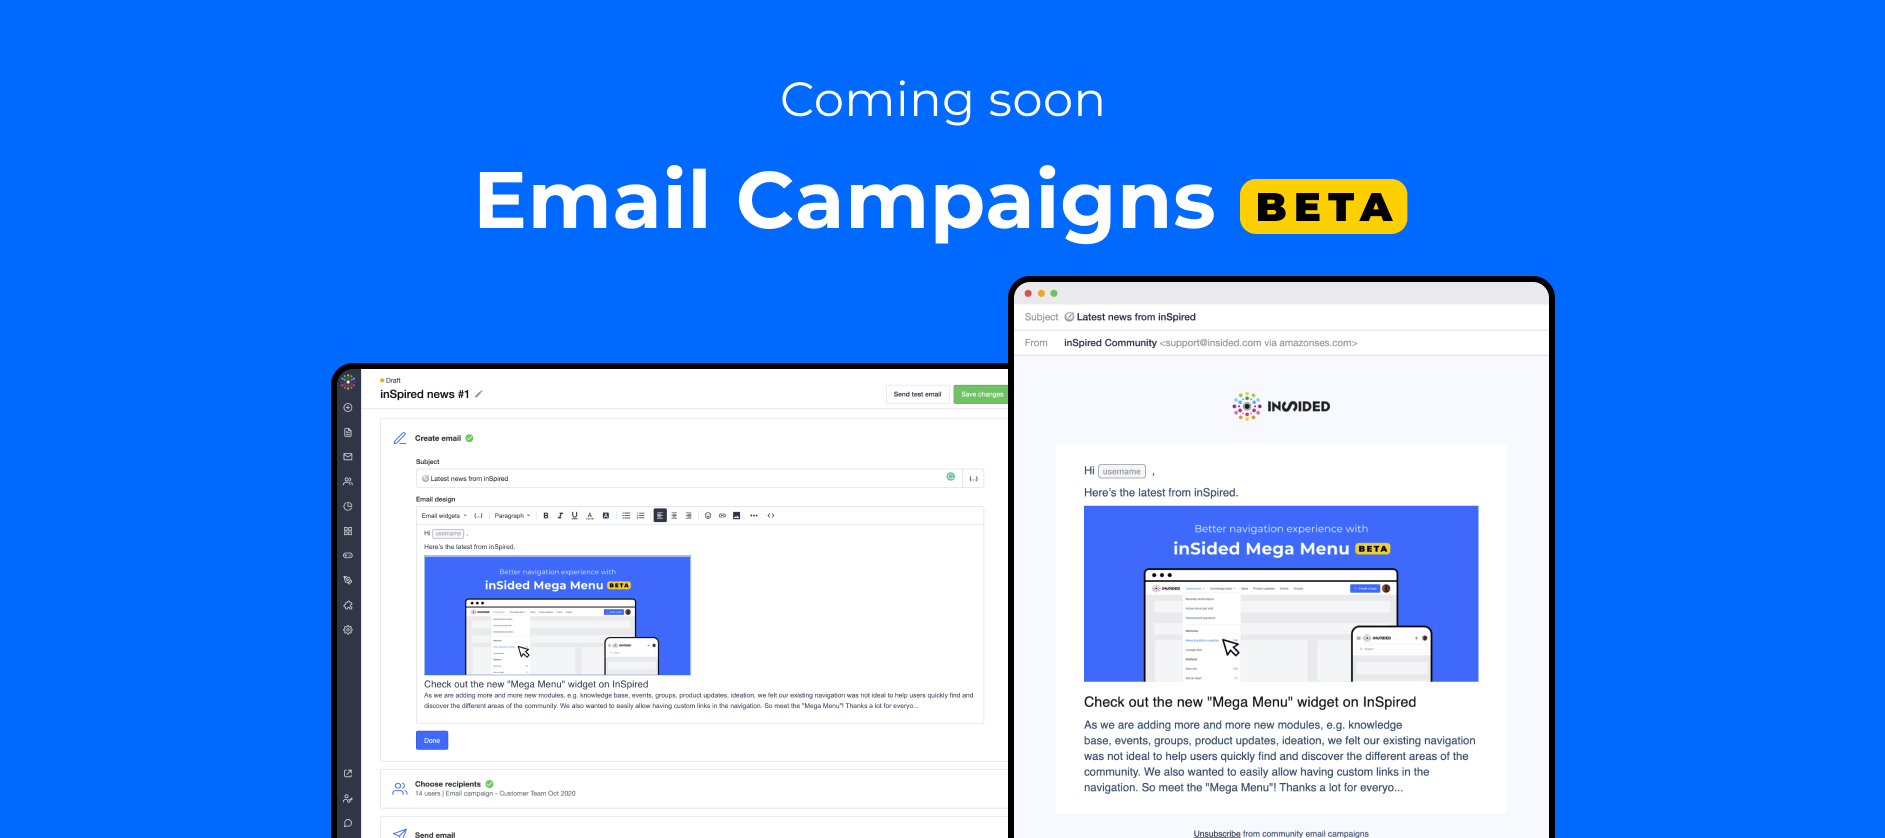 Coming soon: Email Campaigns